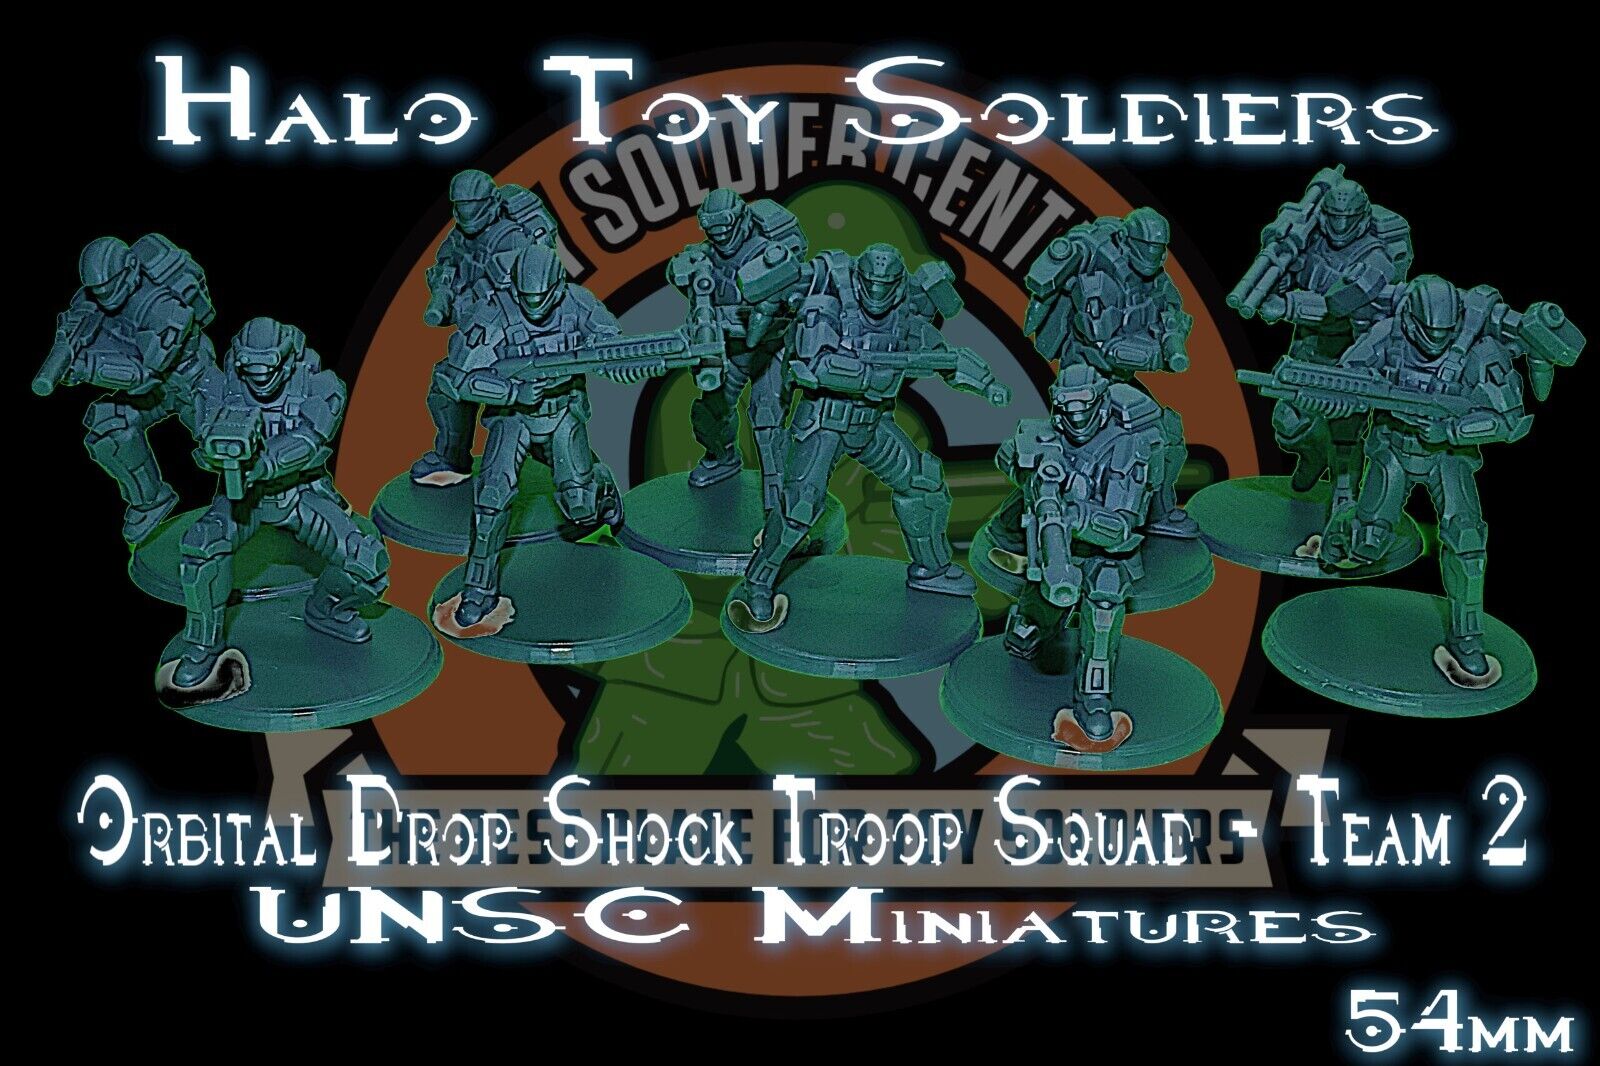 Halo Toy Soldiers - ODST 54mm (1:32 Scale) - 10 Man Squad - Series 2 - Warhammer